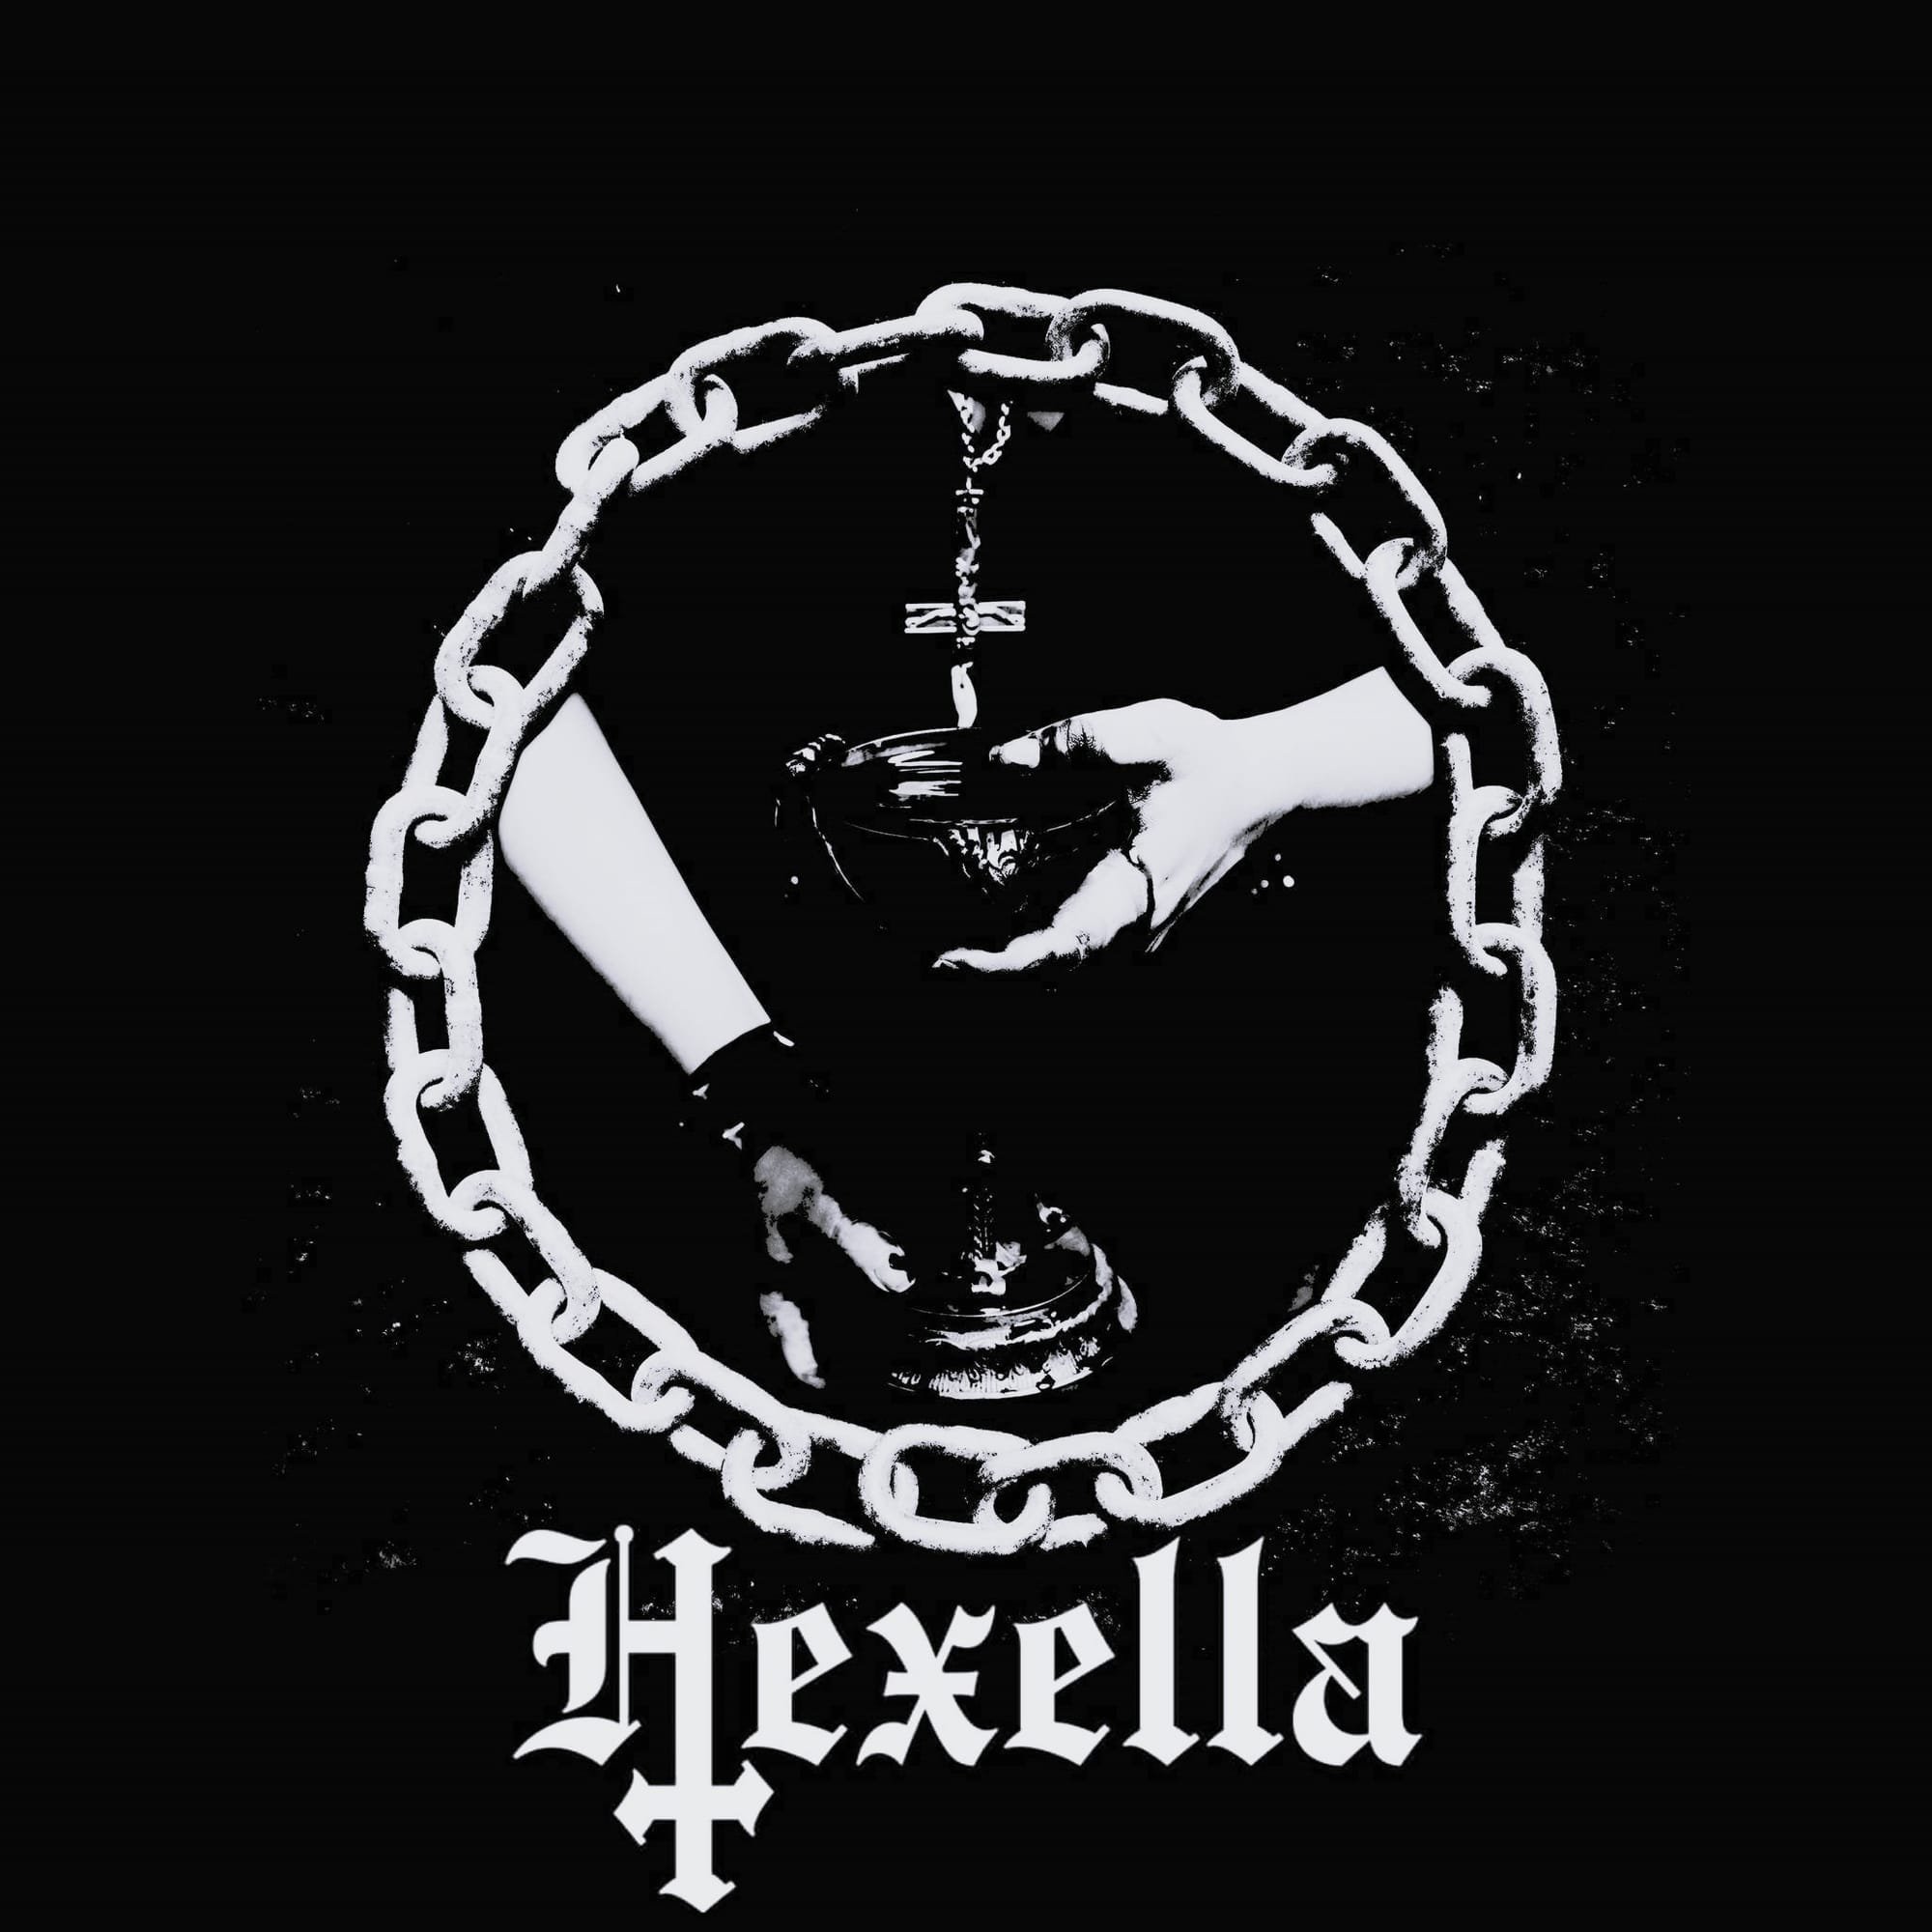 Interview with HEXELLA